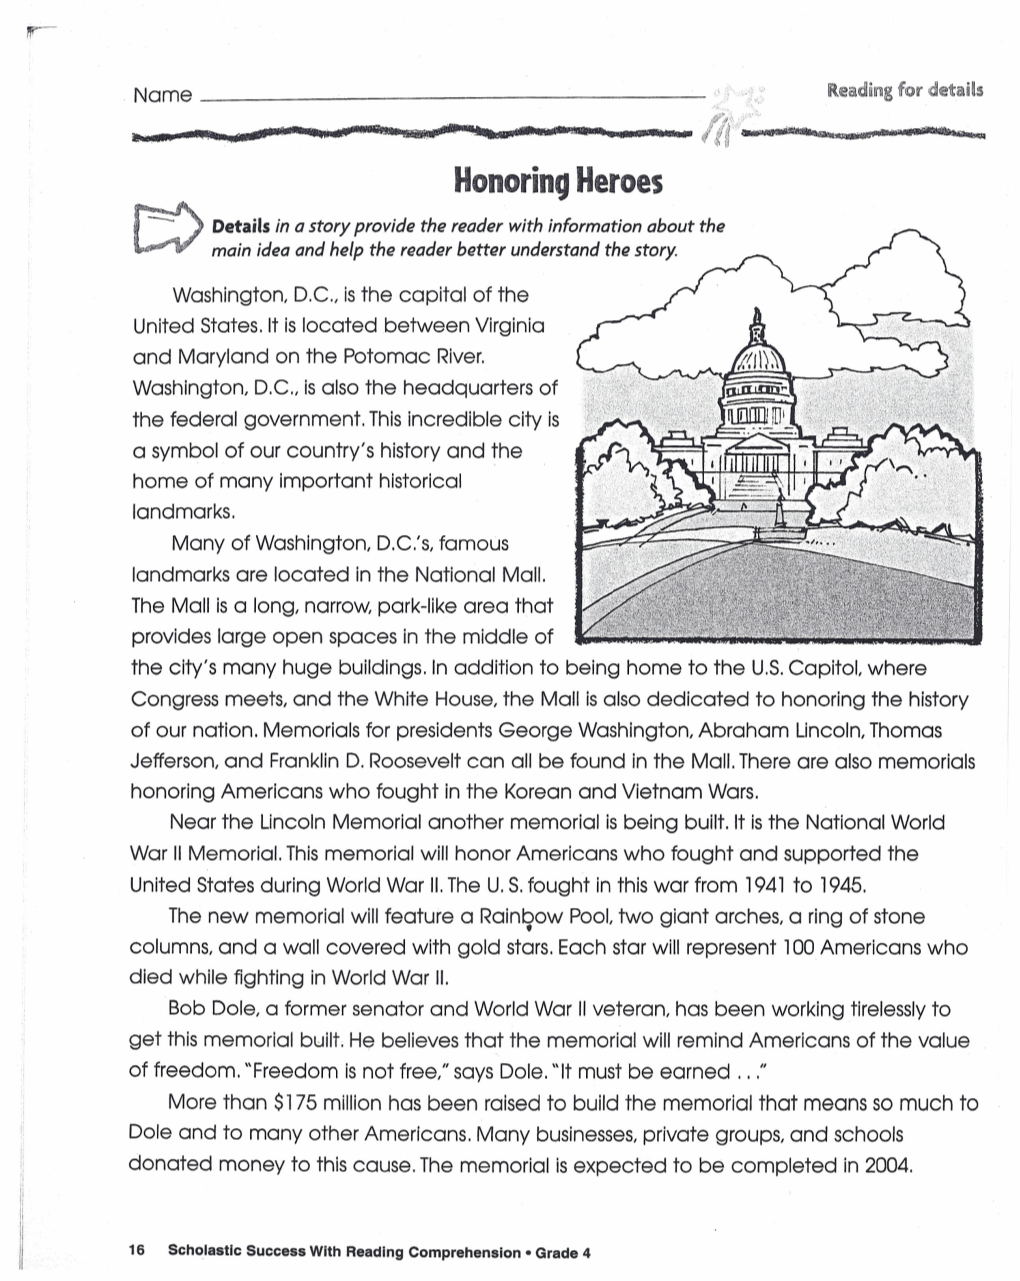 Honoring Heroes ~ Details in a Story Provide the Reader with Information About the L~ Main Idea and Help the Reader Better Understand the Story